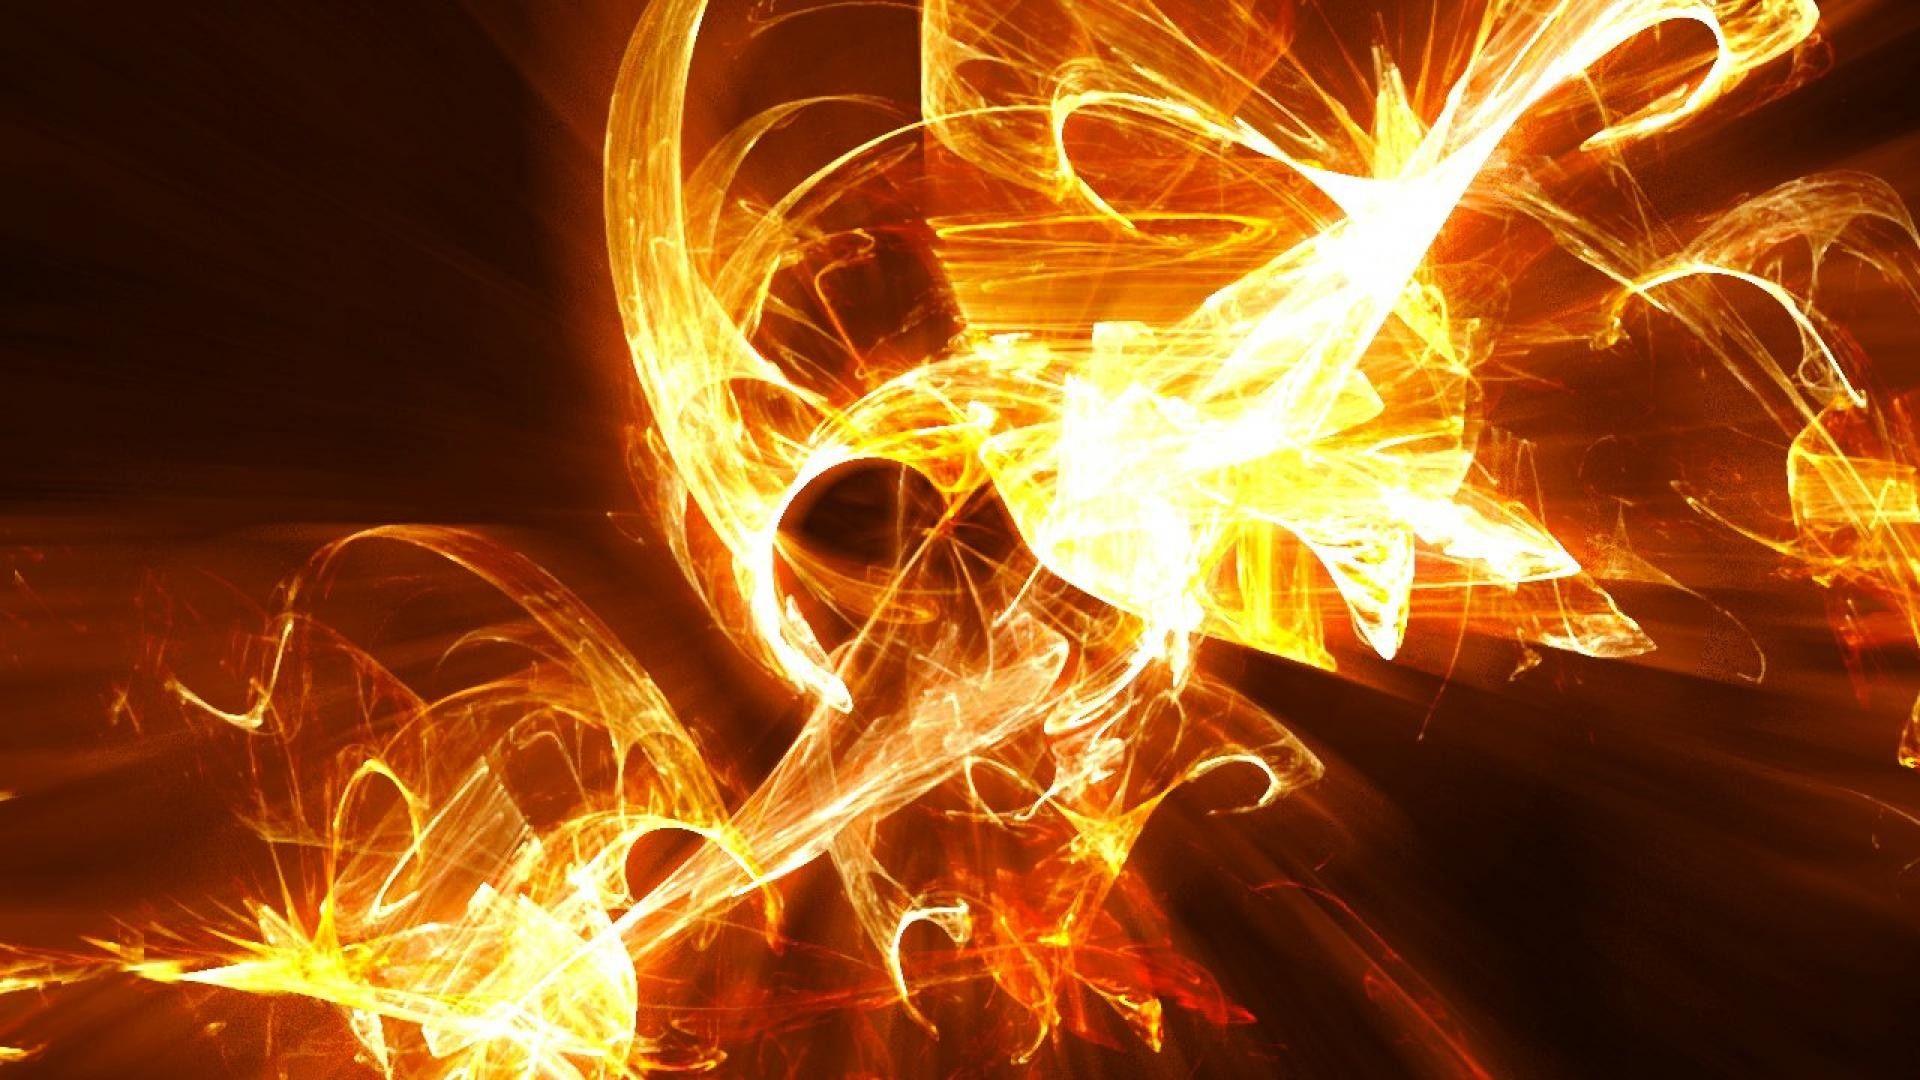 Abstract Fire Wallpapers - Top Free Abstract Fire Backgrounds